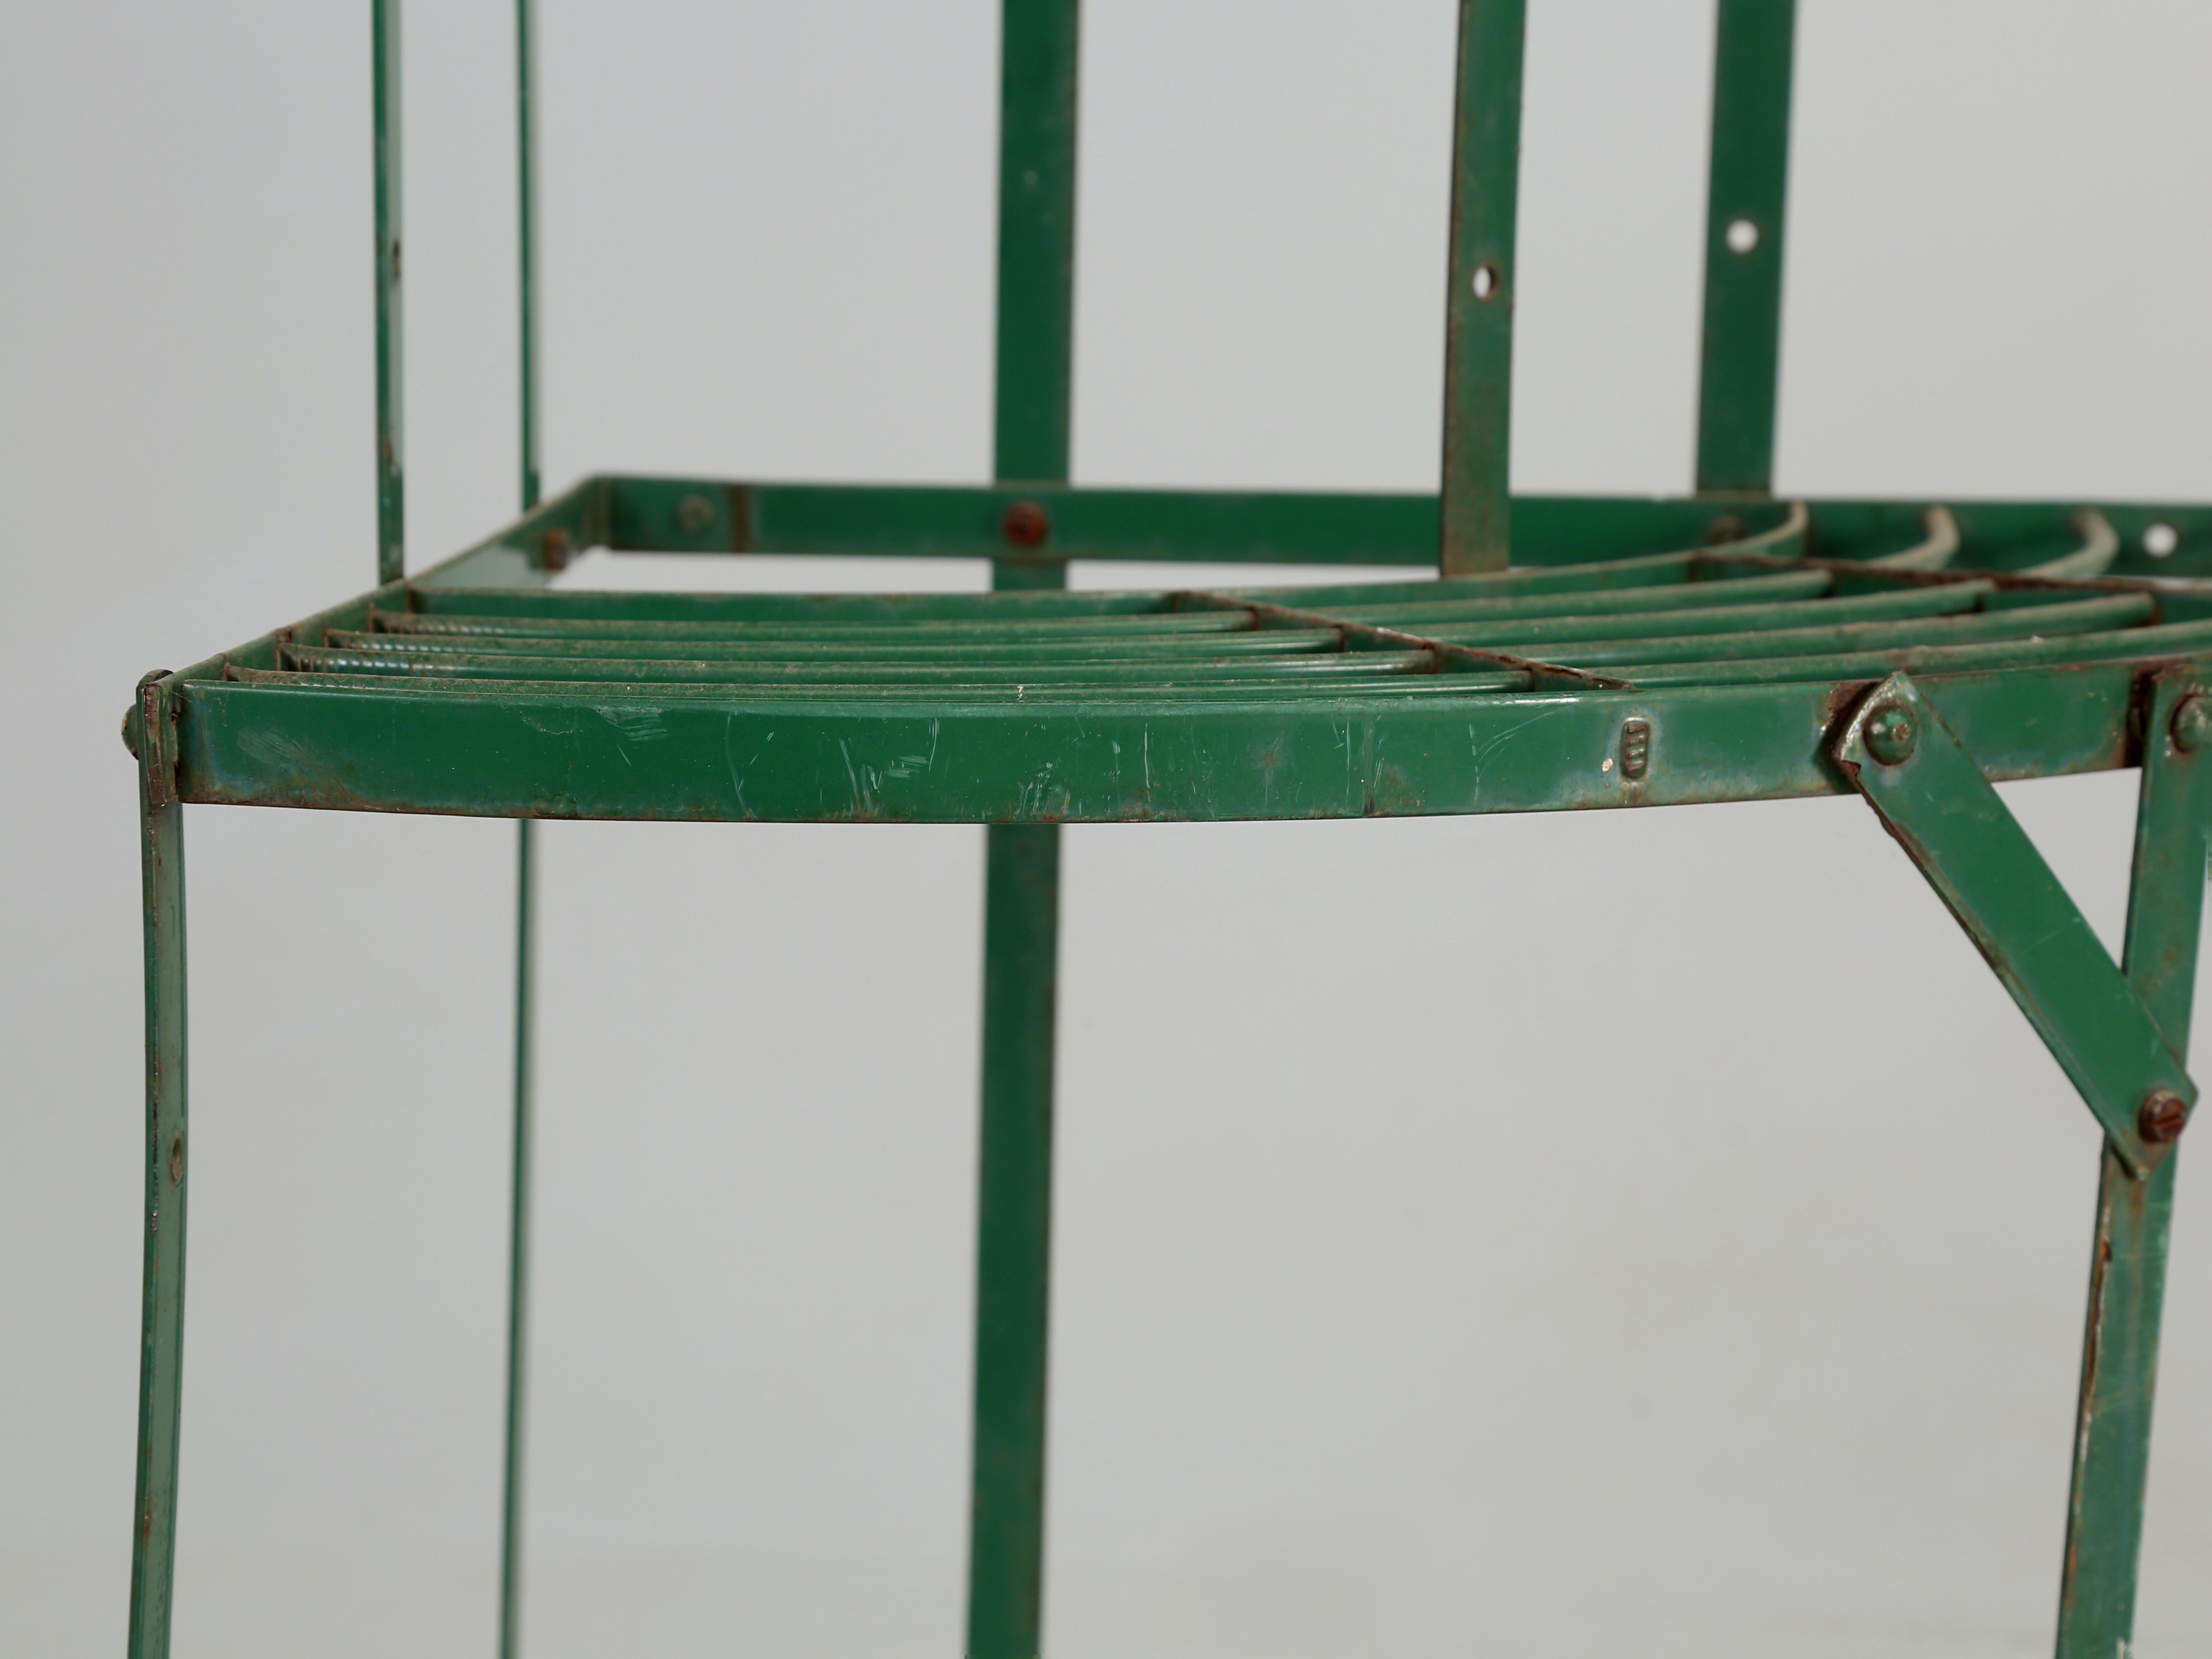 Steel English 3-Tier Demilune Plant Stand in Old Green Paint from Staffordshire, UK